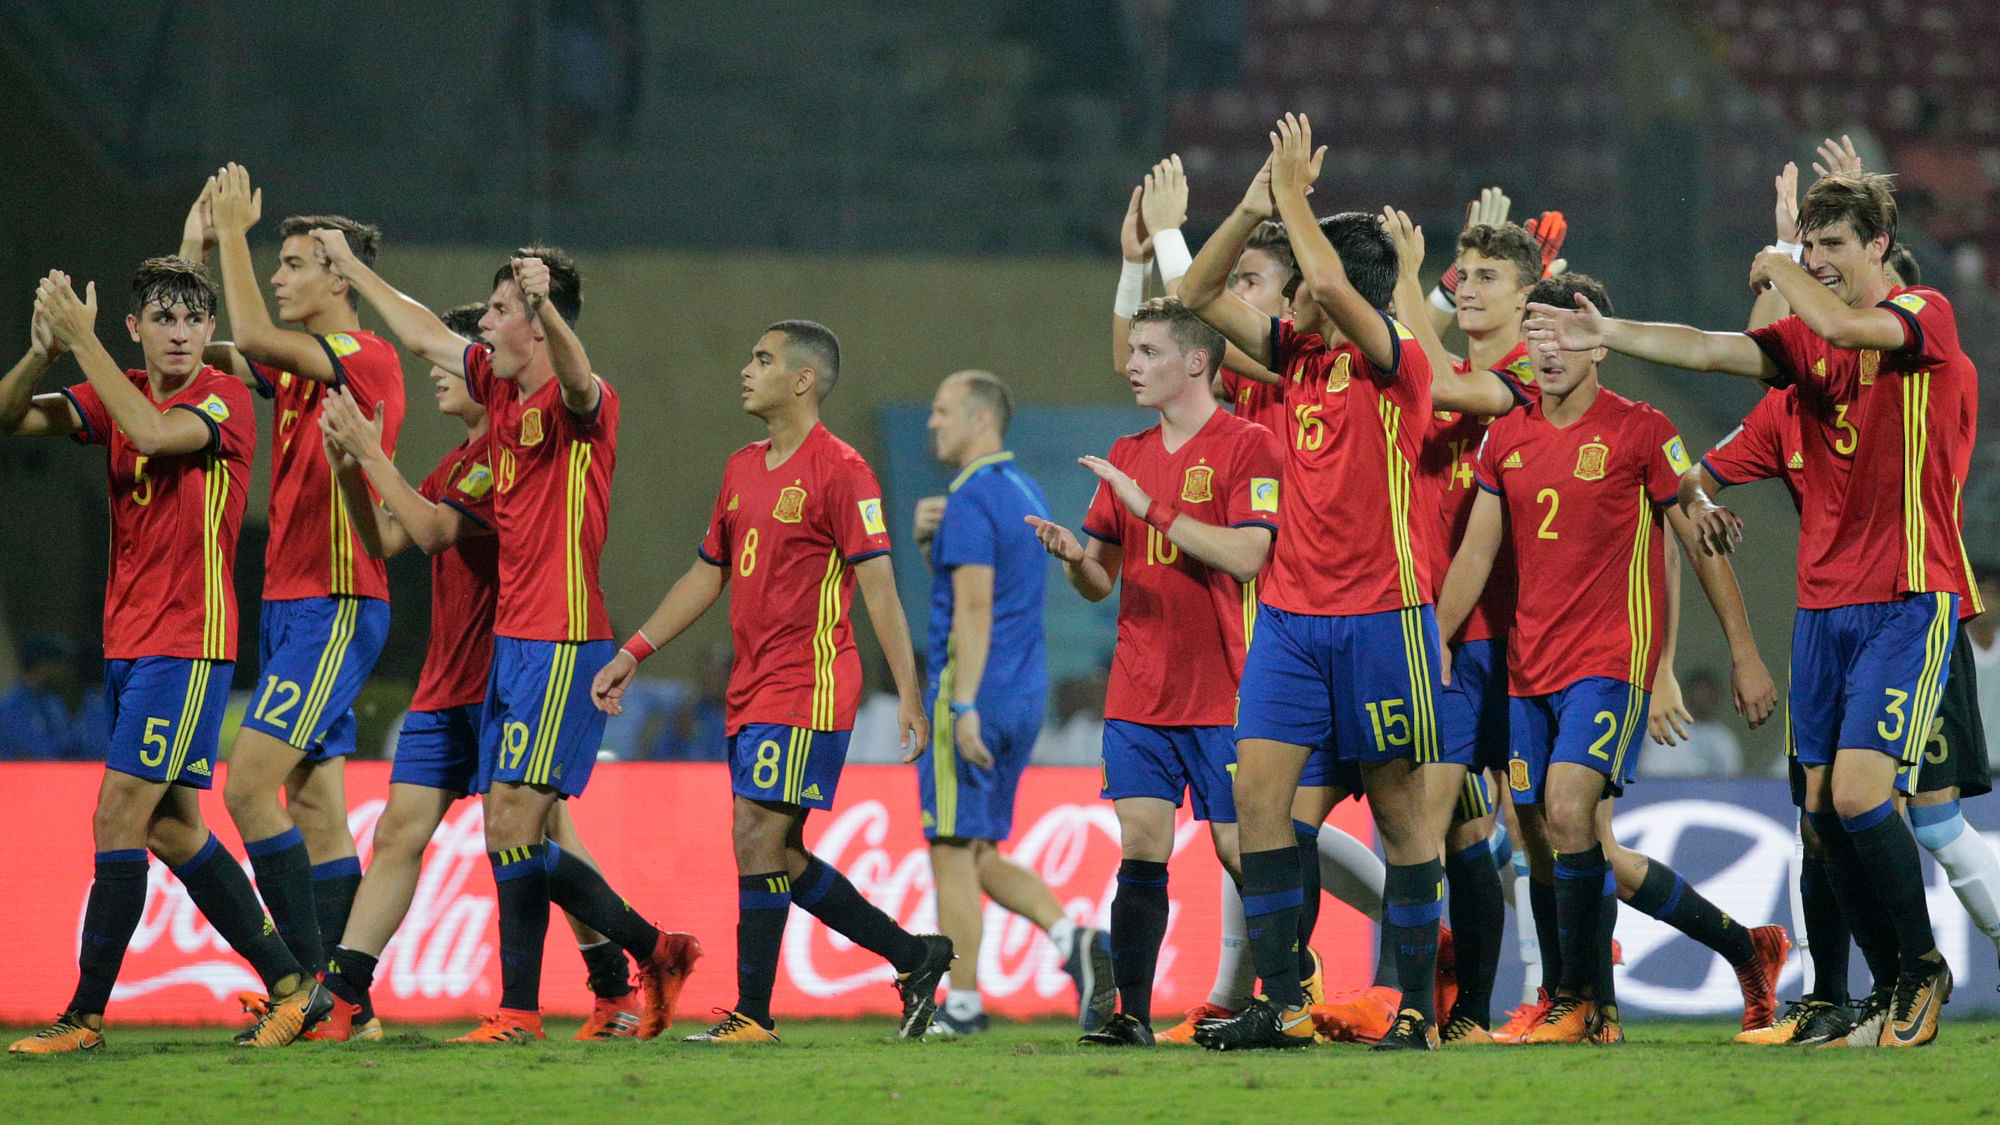 The Spanish team celebrates after beating Mali in the FIFA U-17 World Cup semi-final at the DY Patil Stadium in Mumbai on Wednesday.